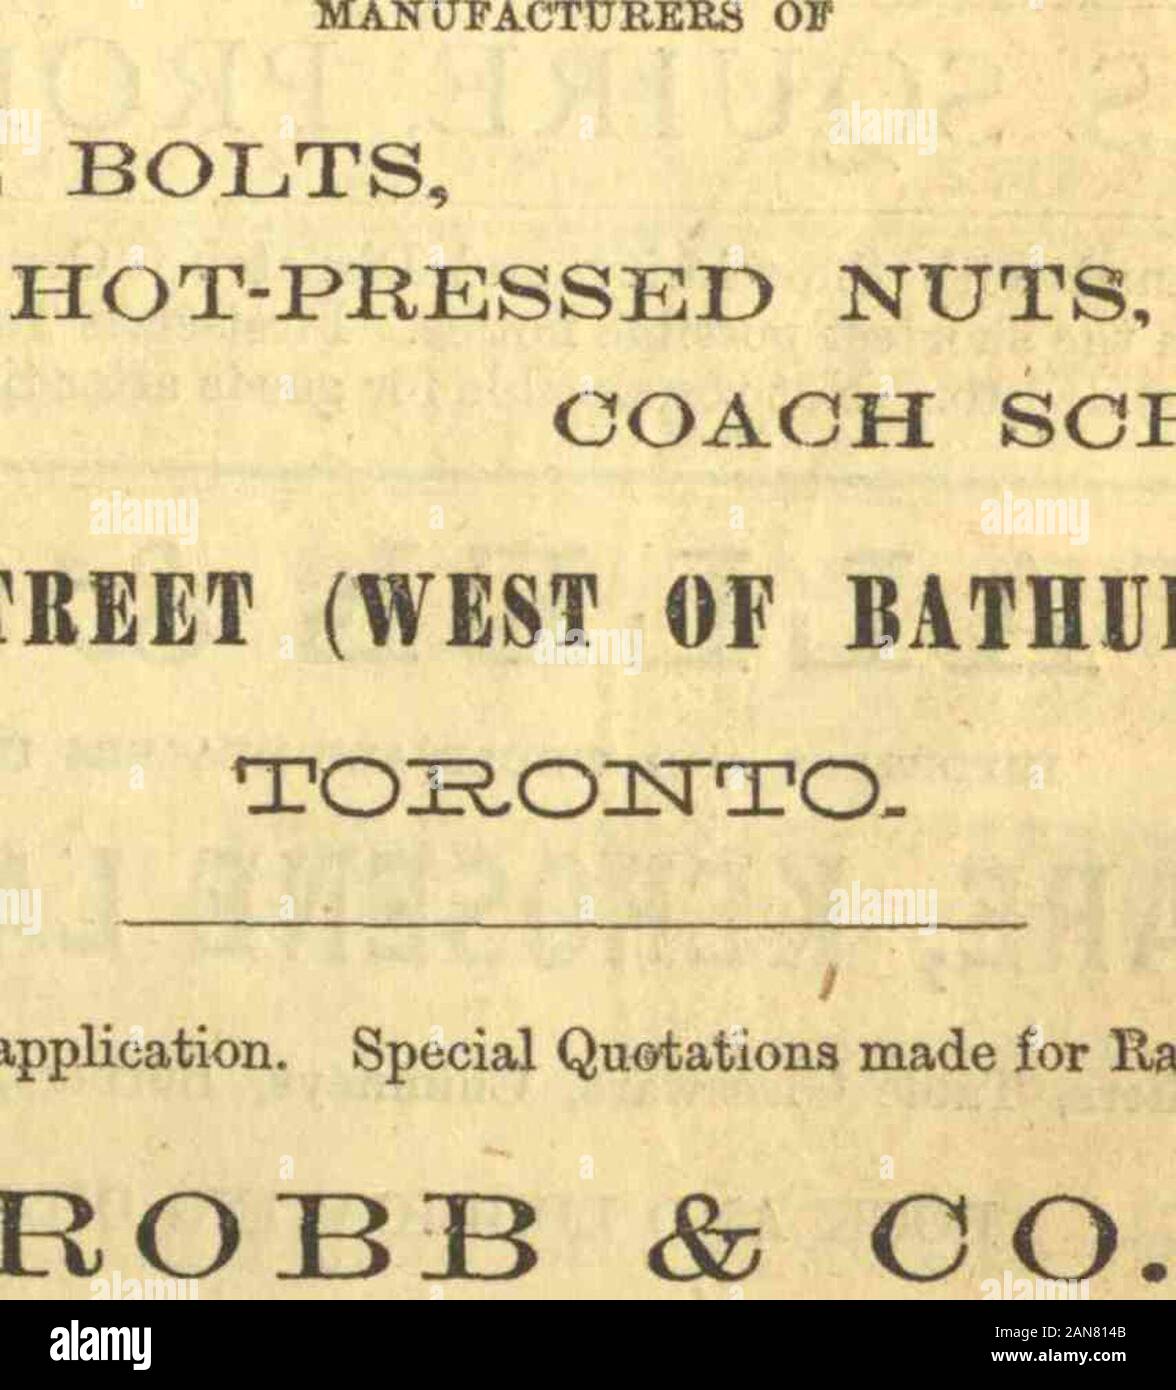 The Canadian Almanac and Directory 1875-1876 . COUNTERFEITS. BROTHERS TIRir IT! TJSE JSrO OTBTEia!!Manufactnred by the Waterloo Yeast Co., 93 Front St. East, Toronto. T. L. BUCKLEE, Manager, MANUFACTURER AND WHOLESALE DEALER IN BOOTS &D SHOES, 31 Church, and G2 & 64 Colborne Streets, Toronto. HOME AND FOREIGN PATENT AGENCY..^Xji:E3:2s:^^3sr]3£3:EiL ohh-Xsties, Solicitor of Patents in Canada, United States & Great Britain, ACCOUNTANT, COMMISSION AND HOUSE AGENT,OFFICE-33 RING STREET EAST, TORONTO, ONTARIO. VIENNA WORLDS EXPOSITION, 1873, AWARDS : THE Iiiillils Cross OF THE IMPERIAL ORDER OF FBA Stock Photo